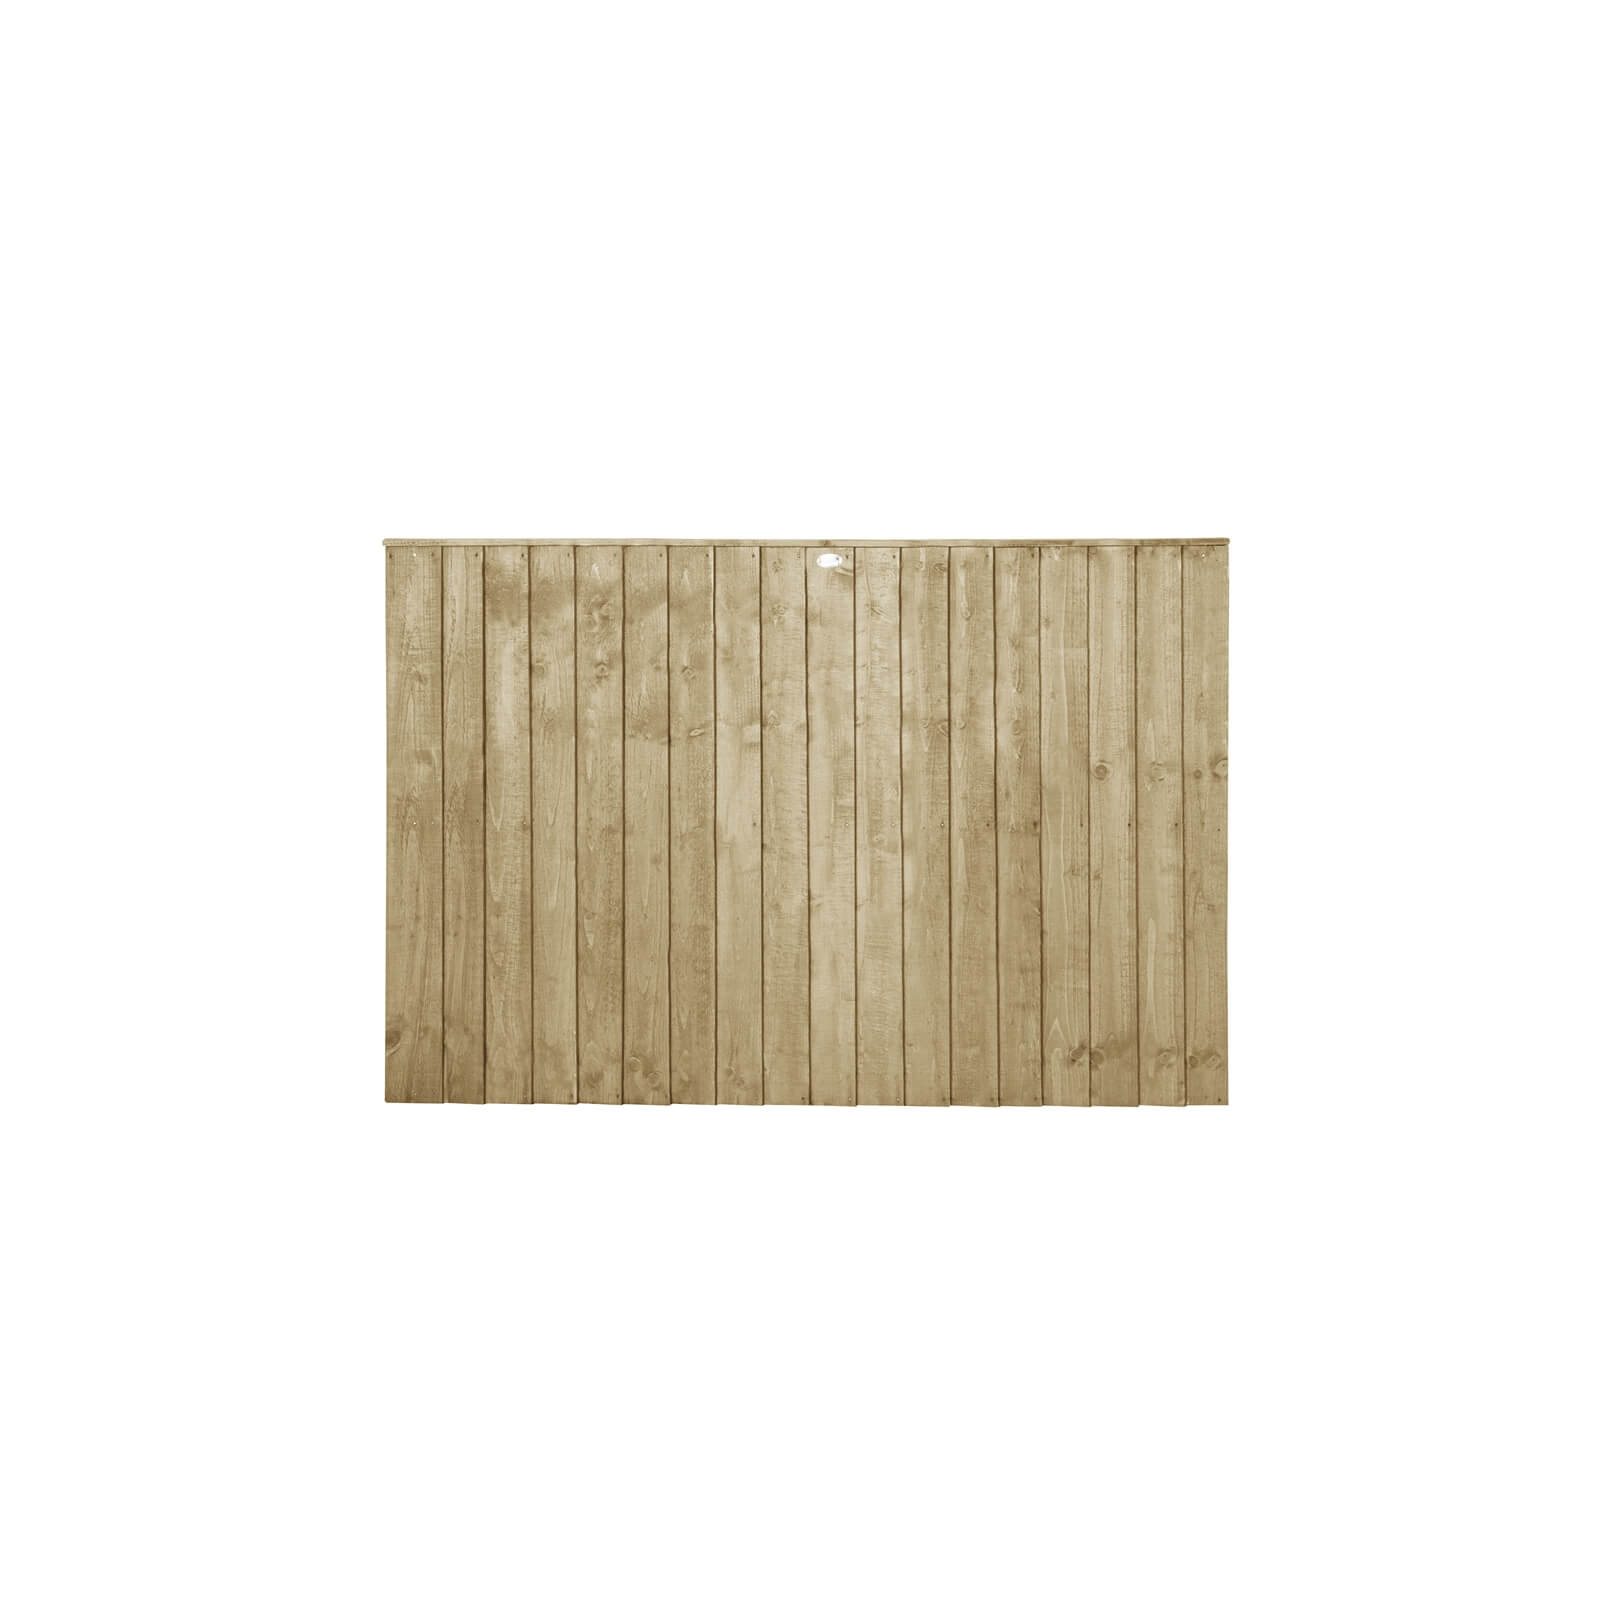 6ft x 4ft (1.83m x 1.23m) Pressure Treated Featheredge Fence Panel - Pack of 4